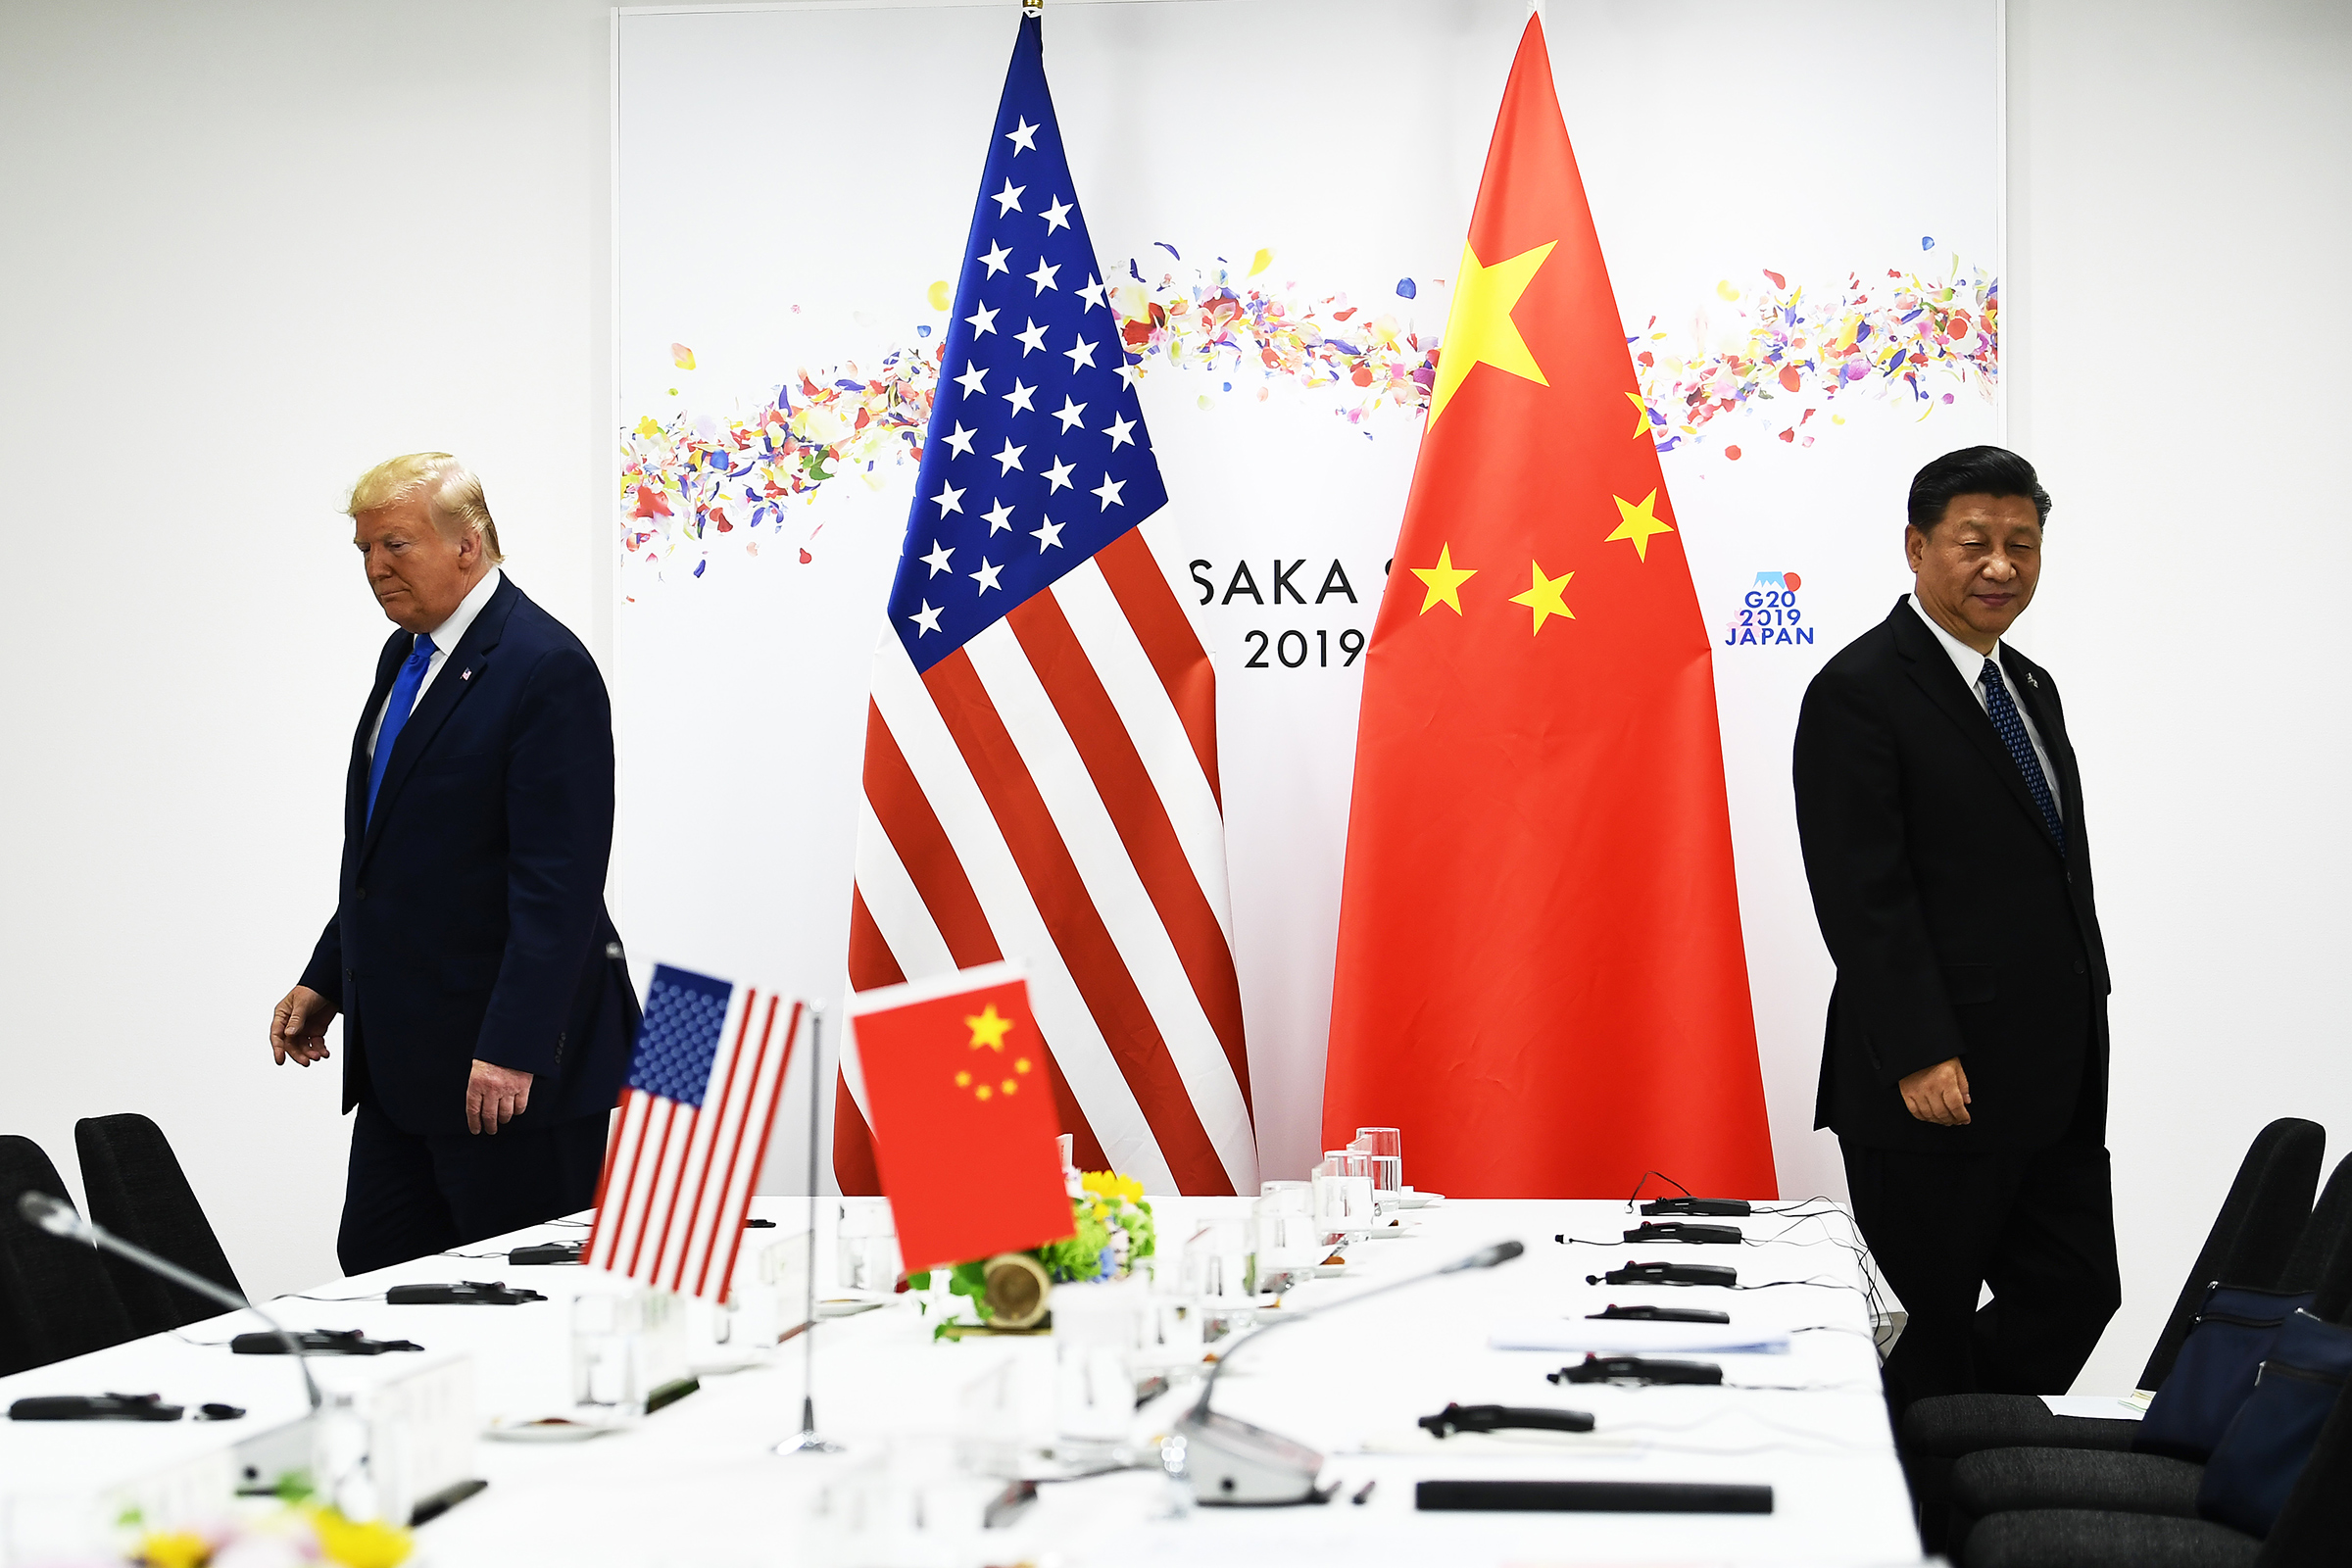 Chinese President Xi Jinping and US President Donald Trump attend their bilateral meeting on the sidelines of the G20 Summit in Osaka on June 29, 2019. (Brendan Smialowski—AFP/Getty Images)